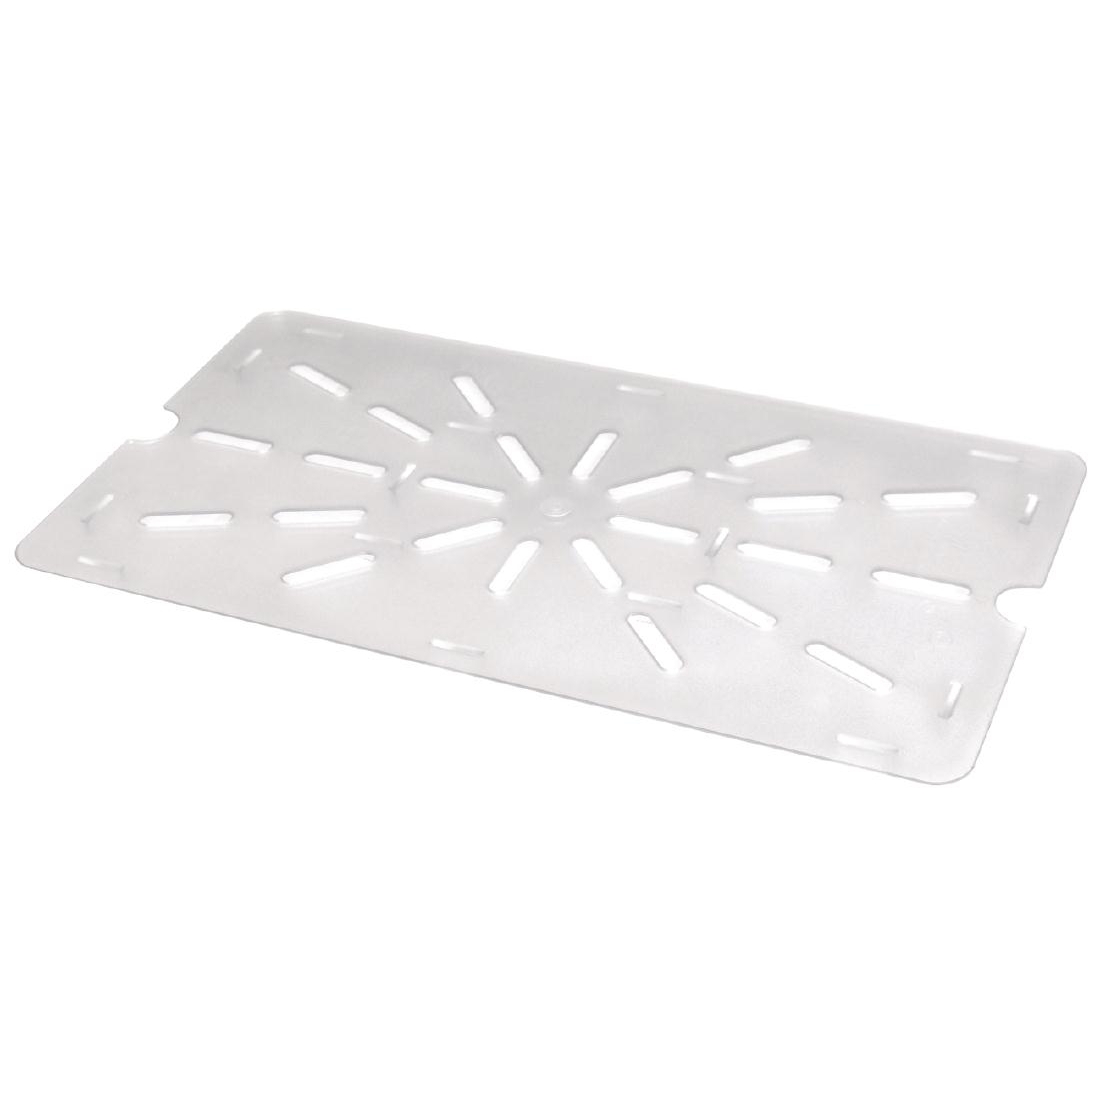 Vogue Drainer Plates for GN 1/1 Polycarbonate Gastronorm Pan